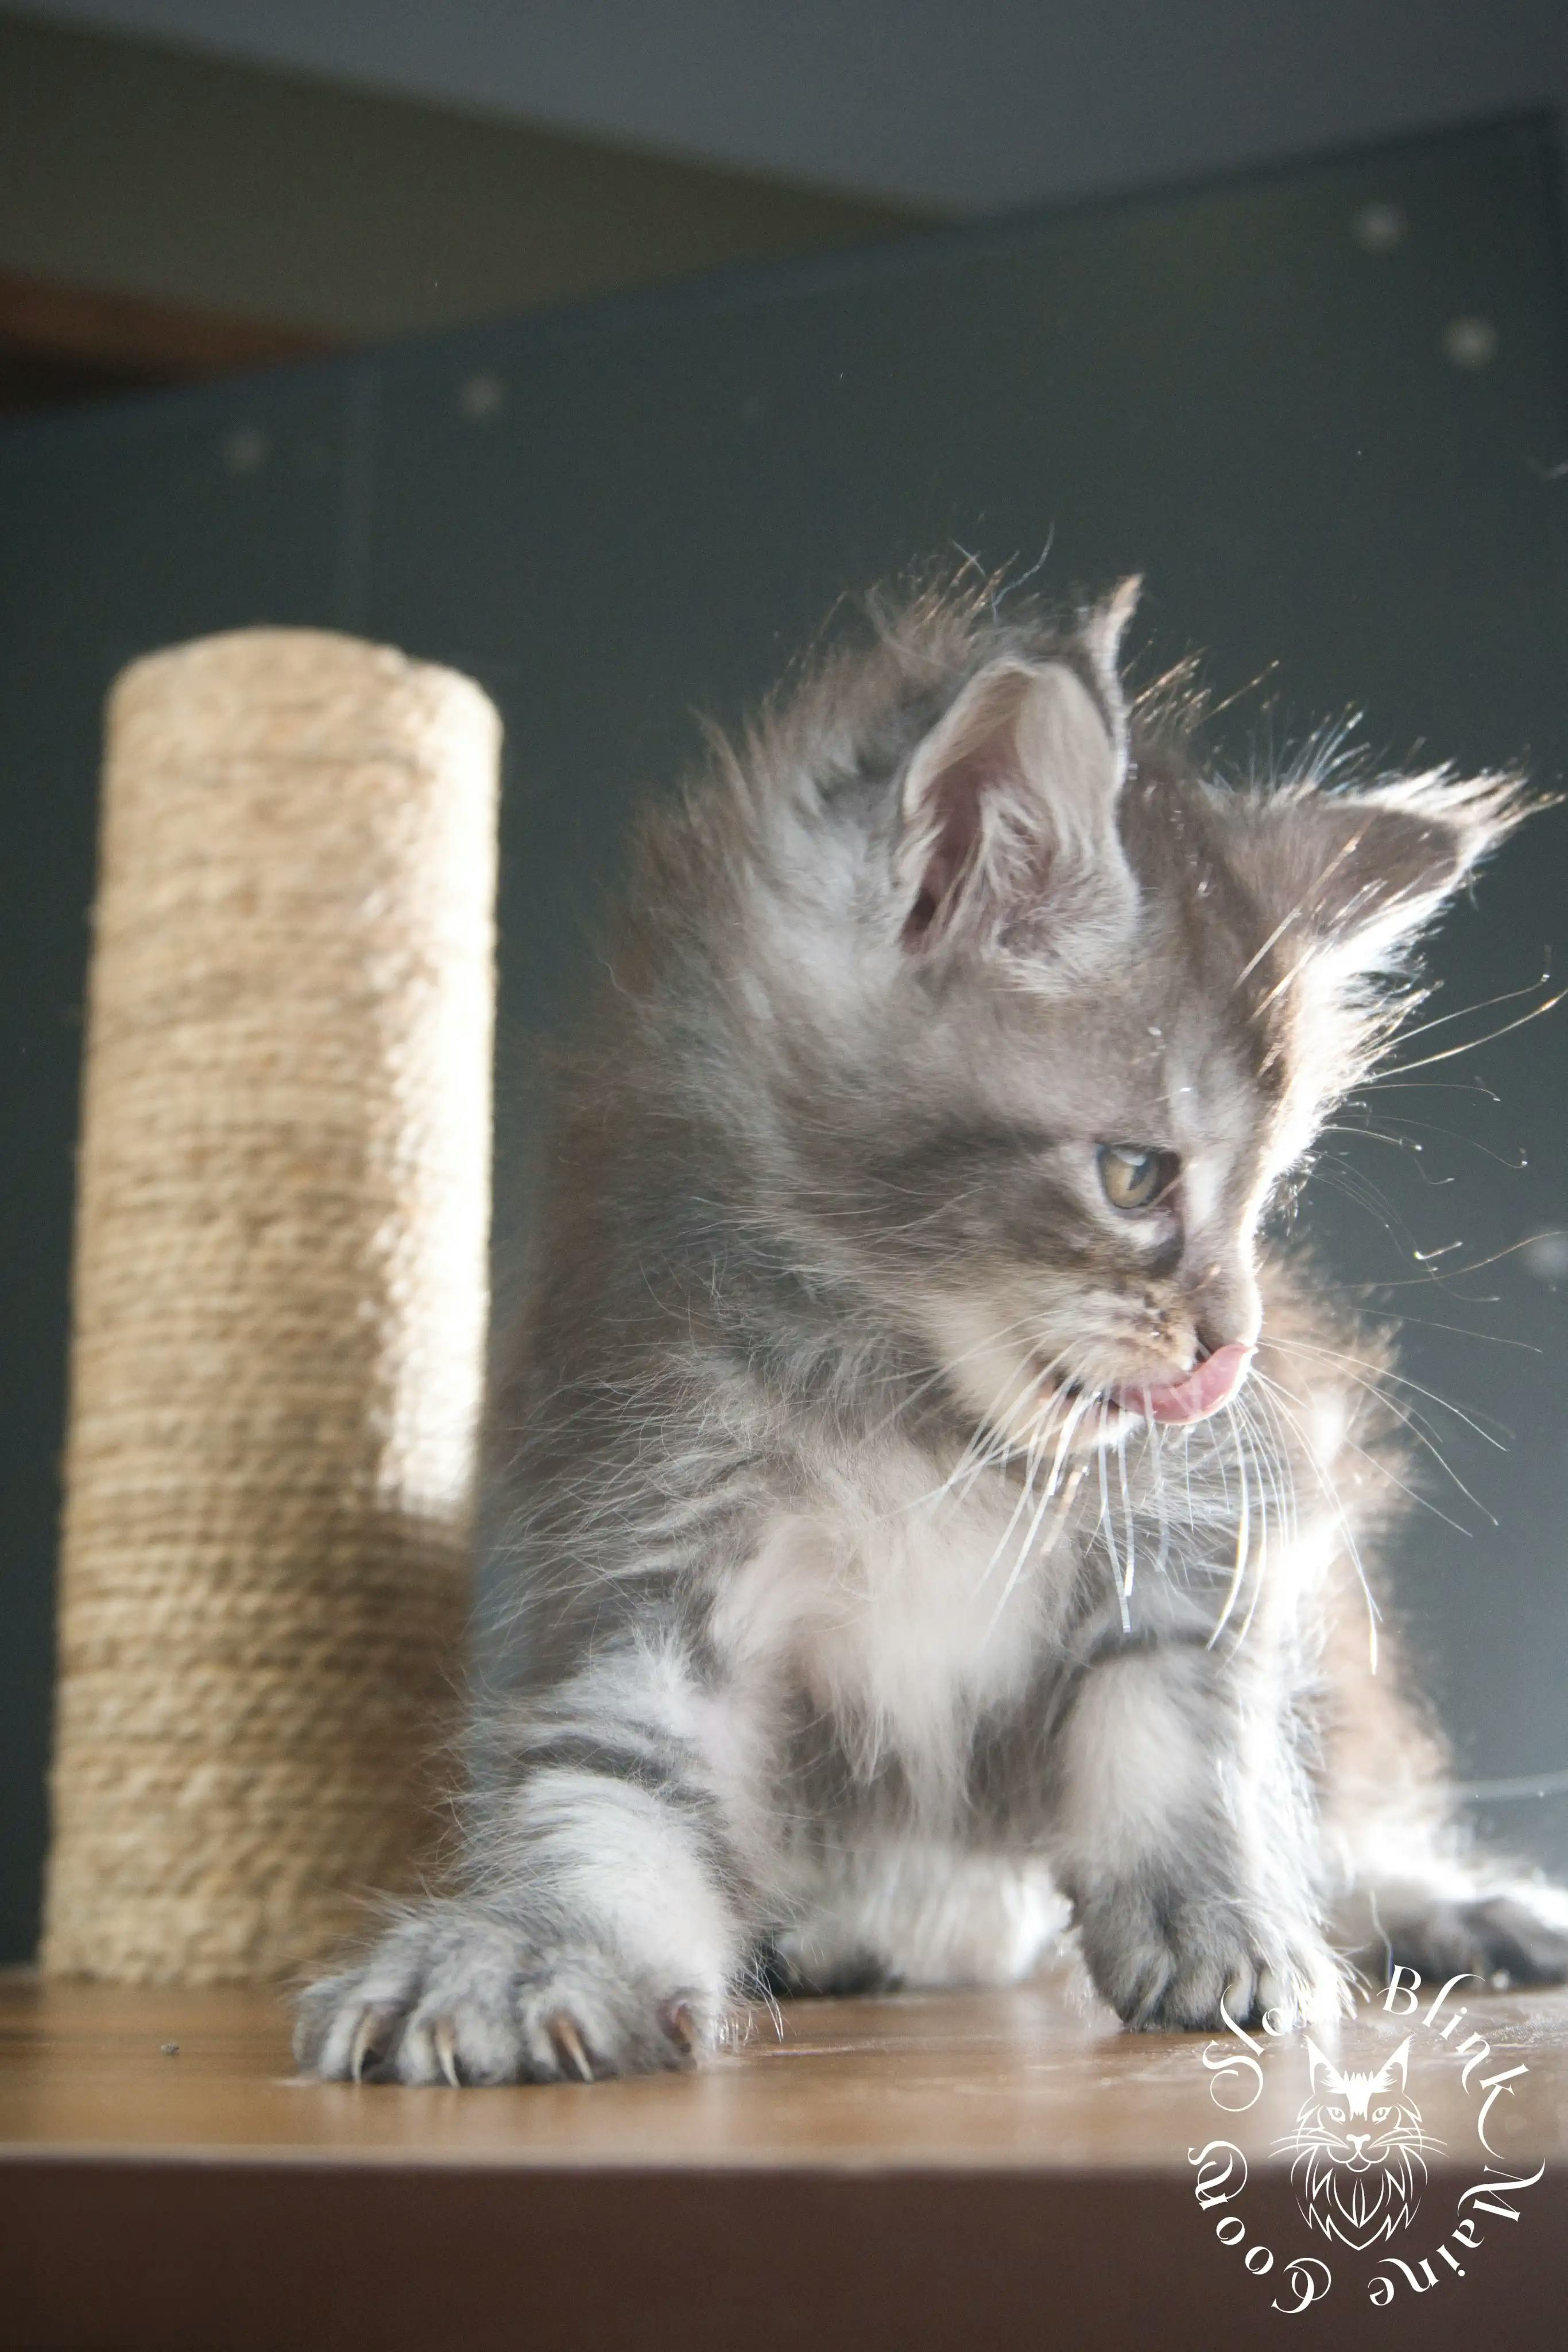 Blue Silver Tabby Maine Coon Kittens > blue silver tabby maine coon kitten | slowblinkmainecoons | 312